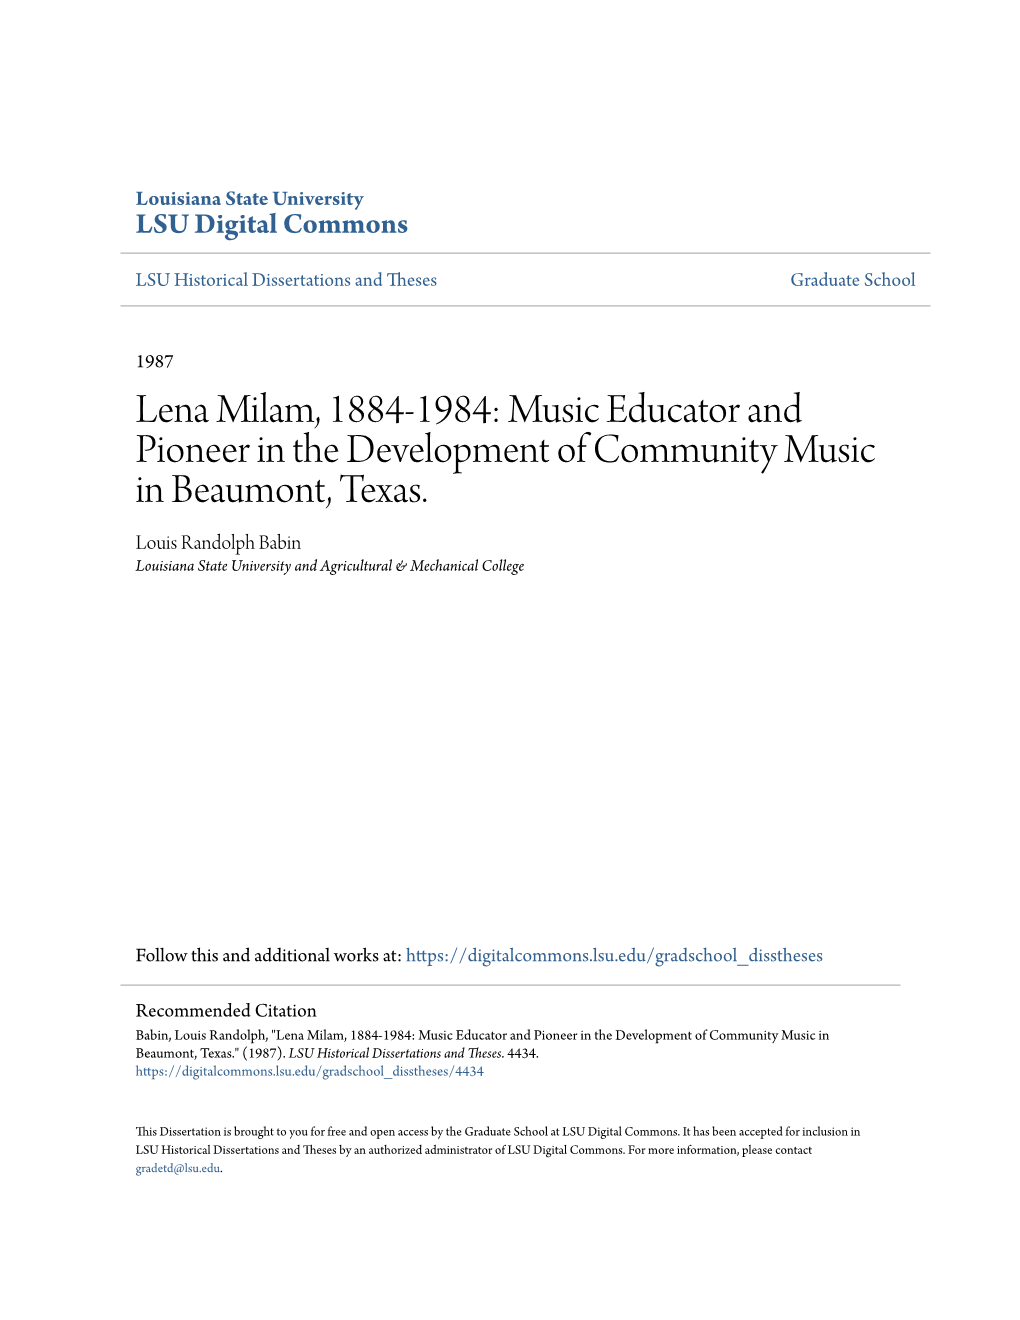 Lena Milam, 1884-1984: Music Educator and Pioneer in the Development of Community Music in Beaumont, Texas